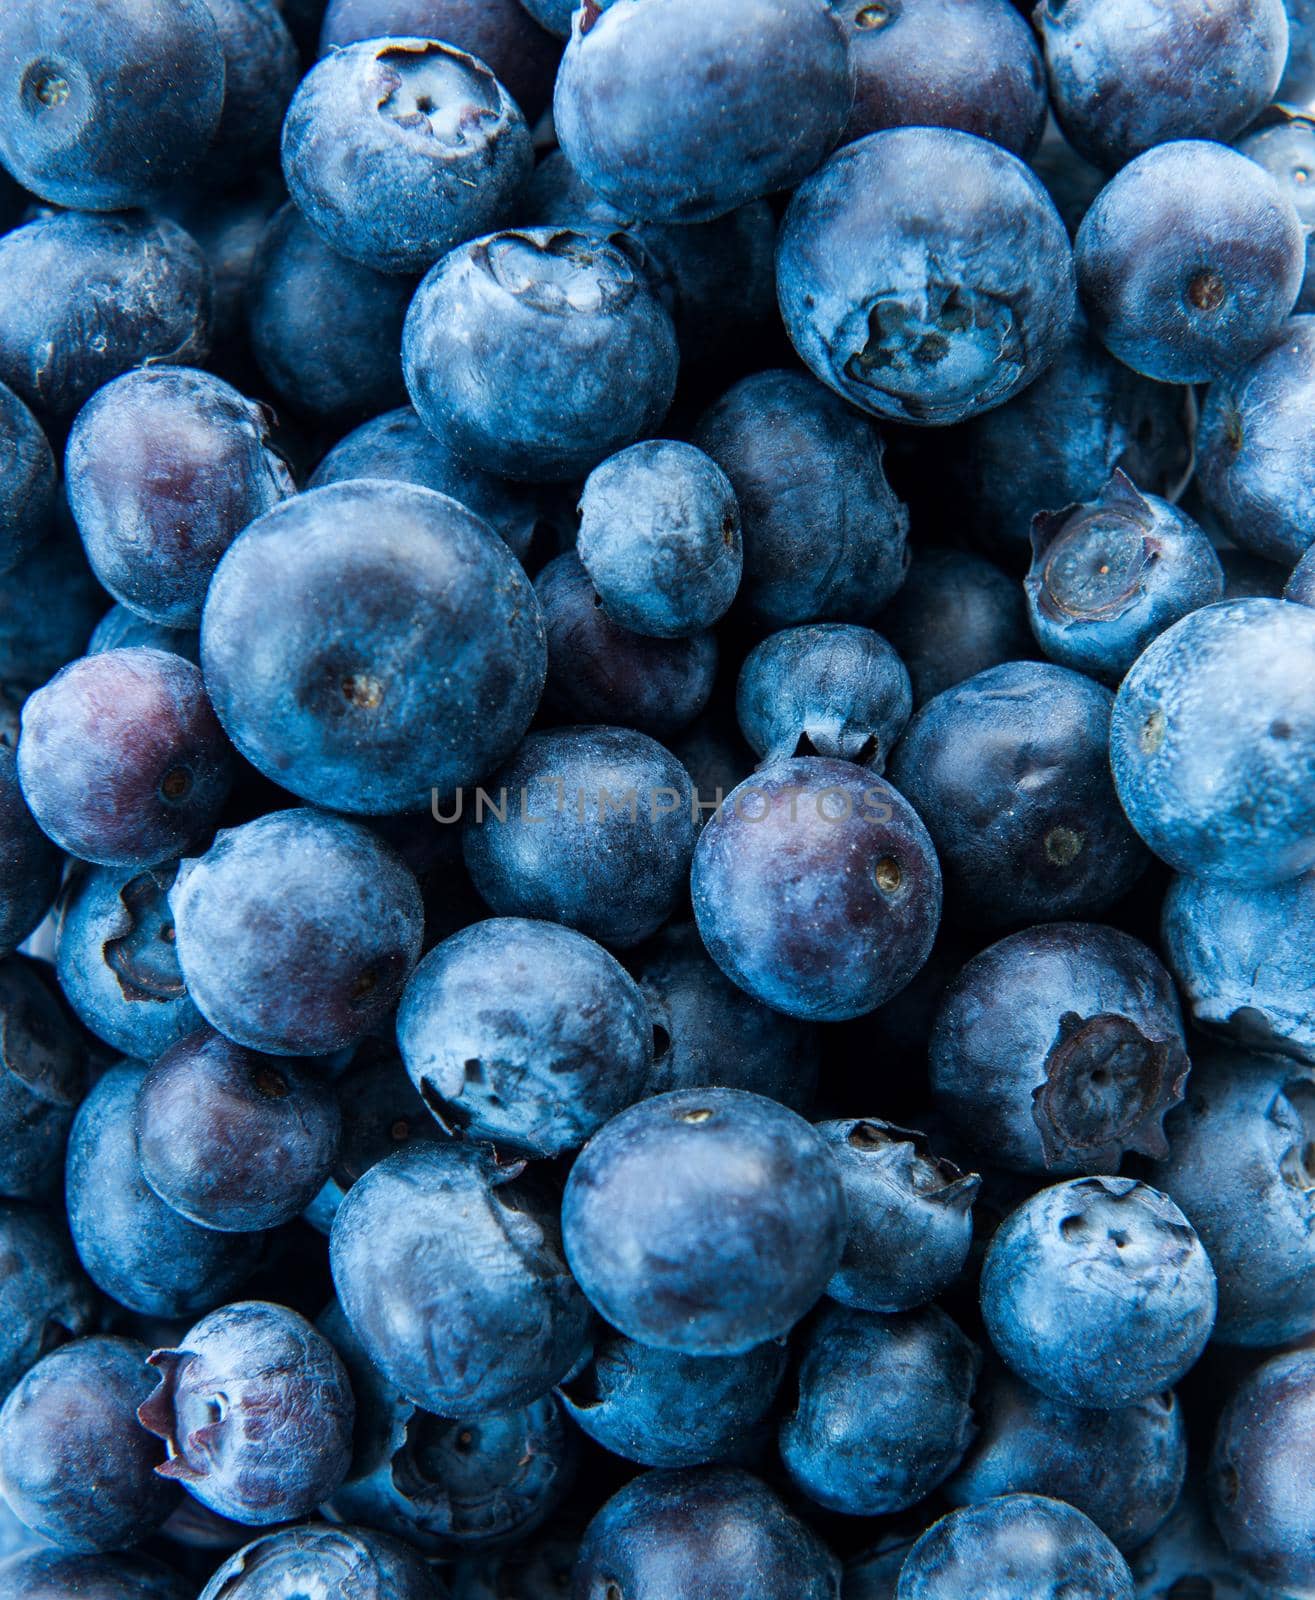 Freshly picked blueberries as background